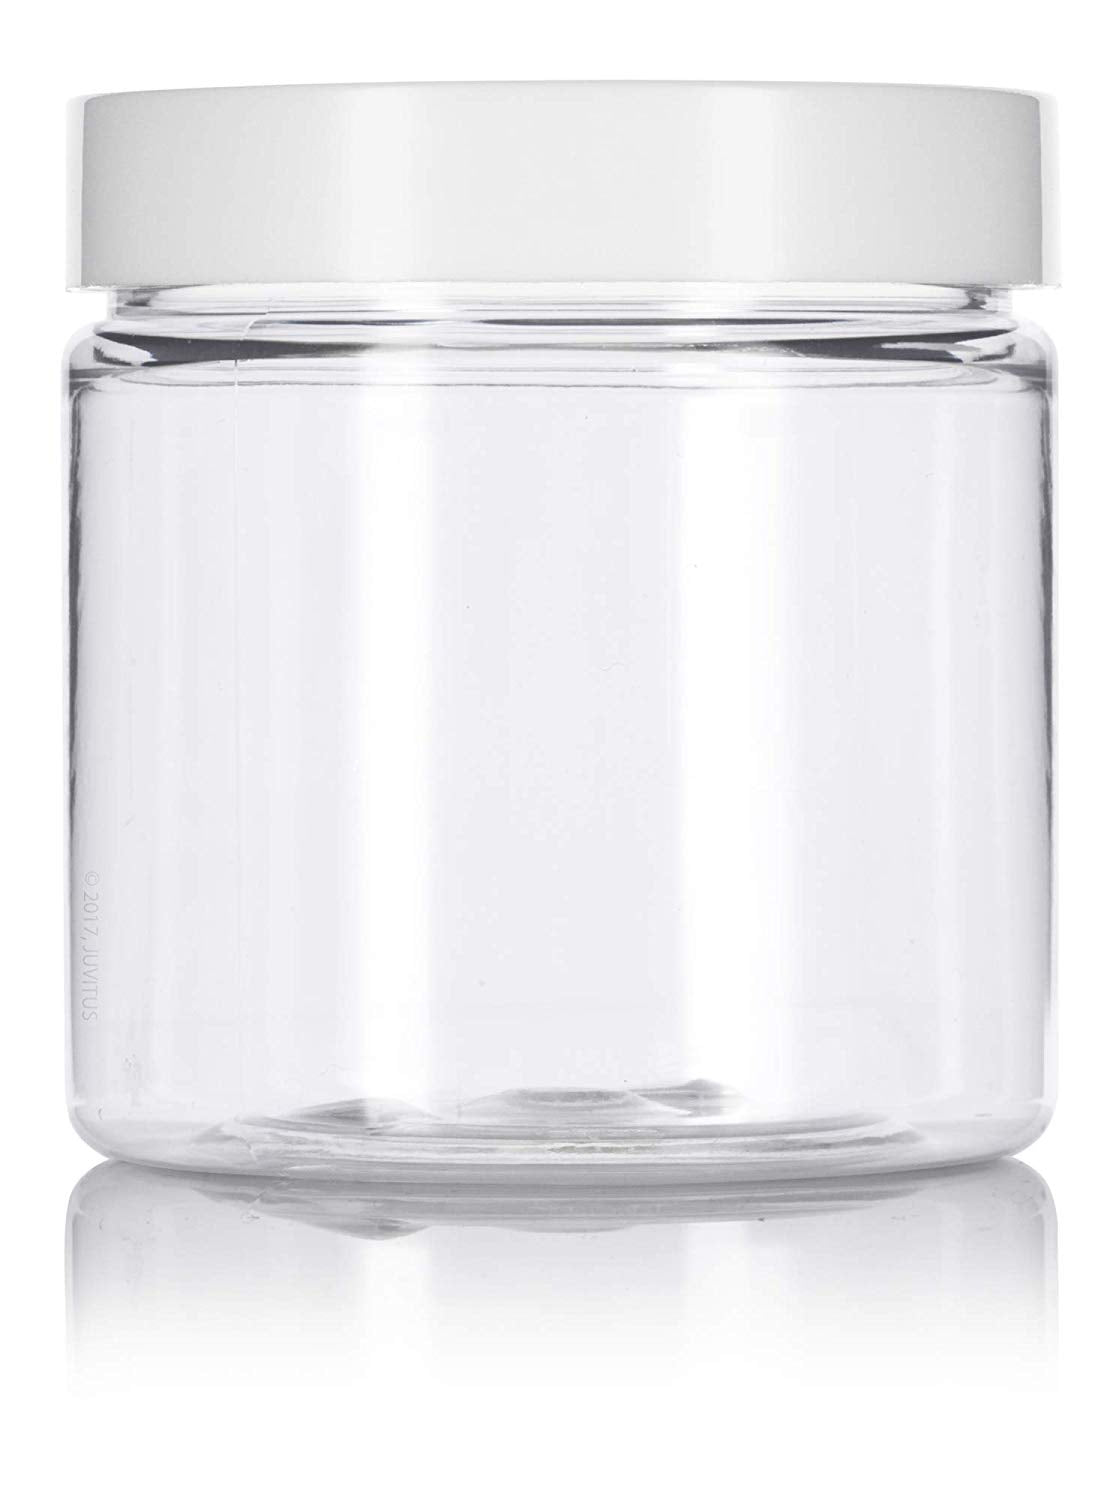 Plastic Jar in Clear with White Foam Lined Lid - 4 oz / 120 ml